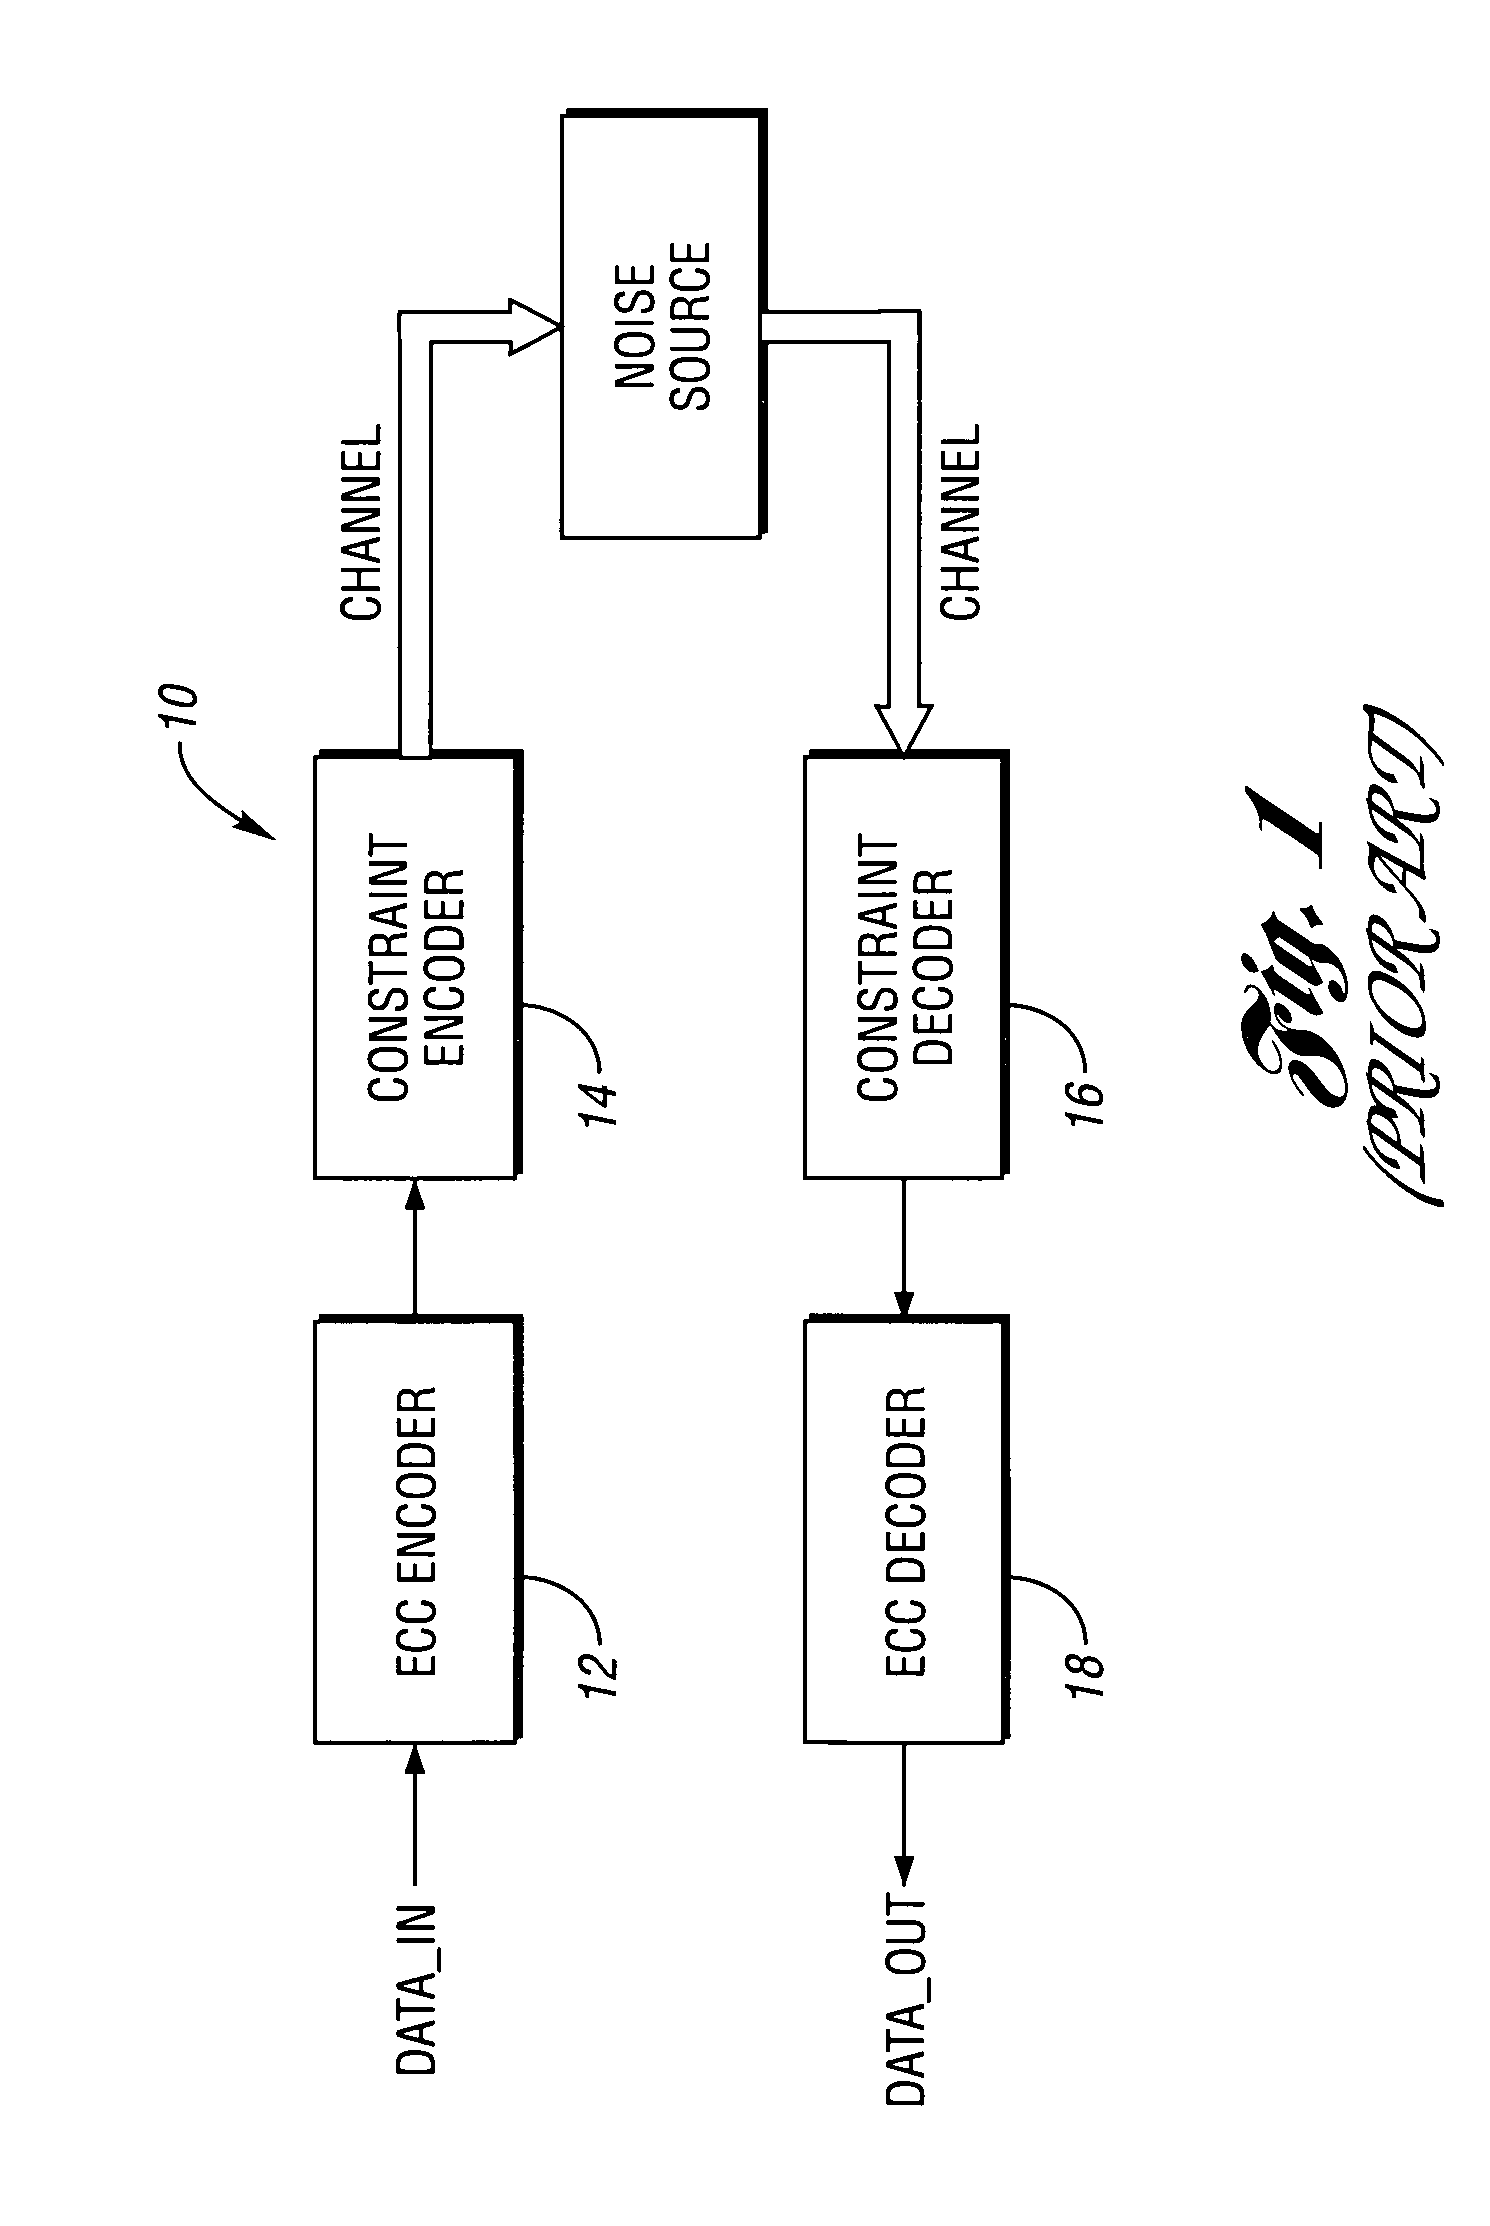 System and method for reverse error correction coding